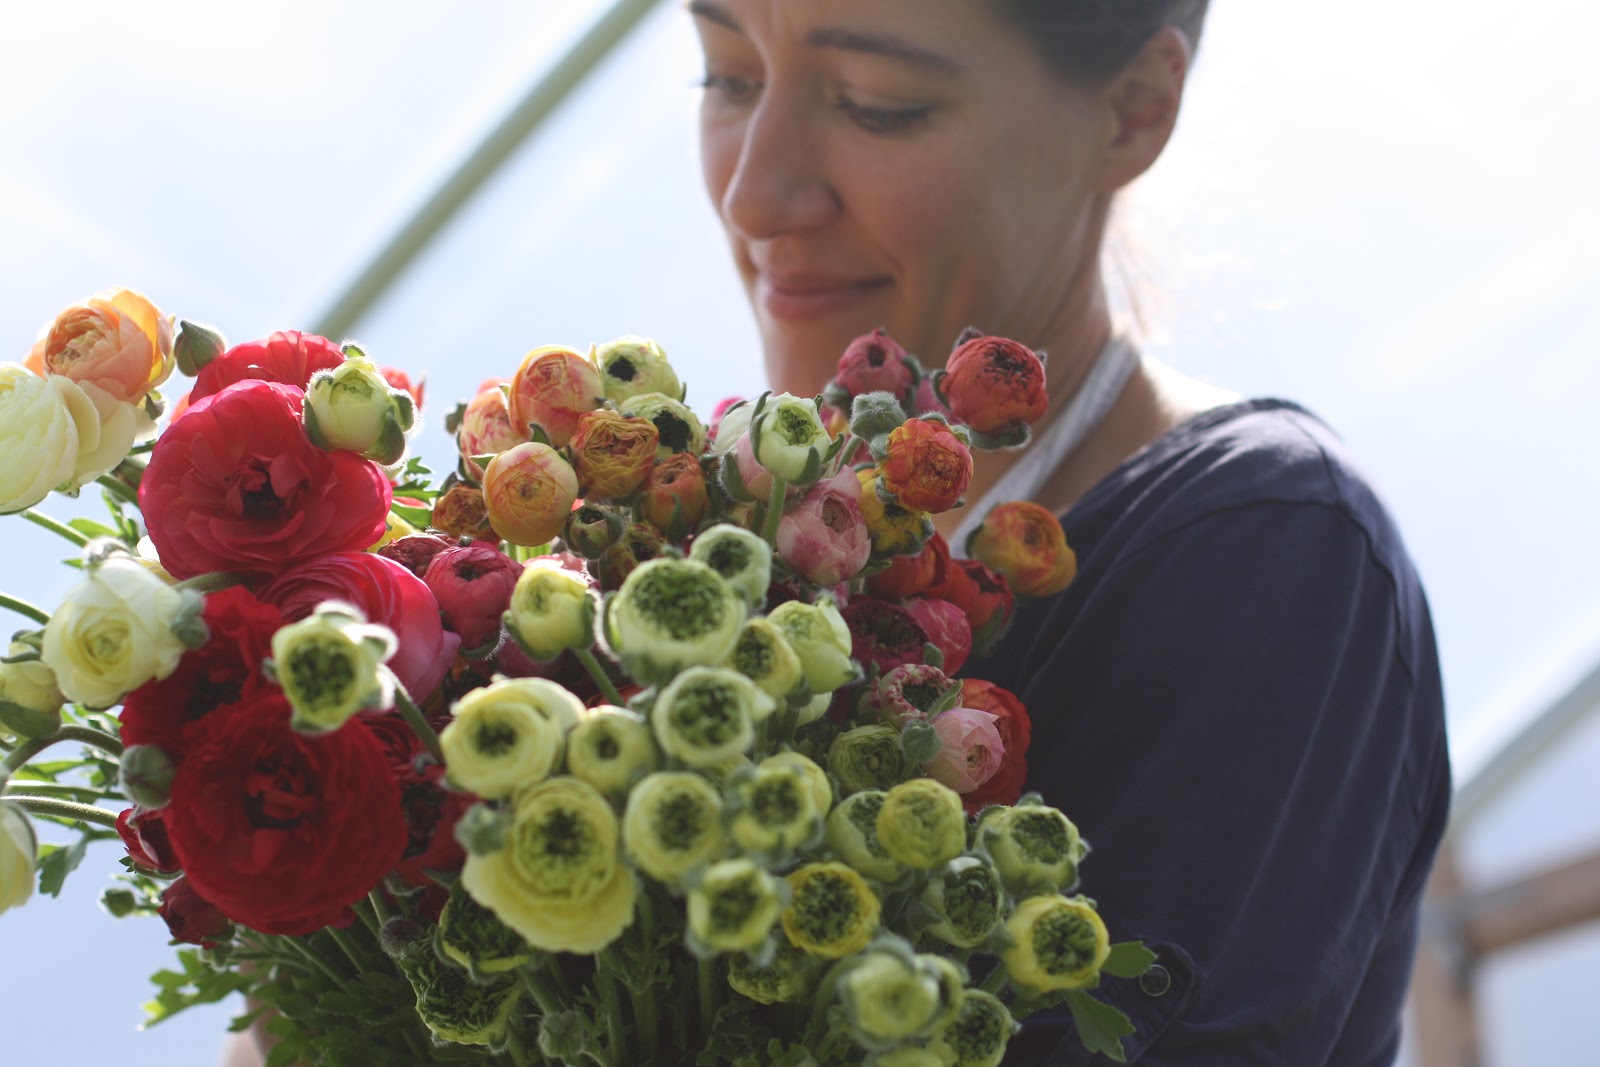 Erin Benzakein with an armload of ranunculus